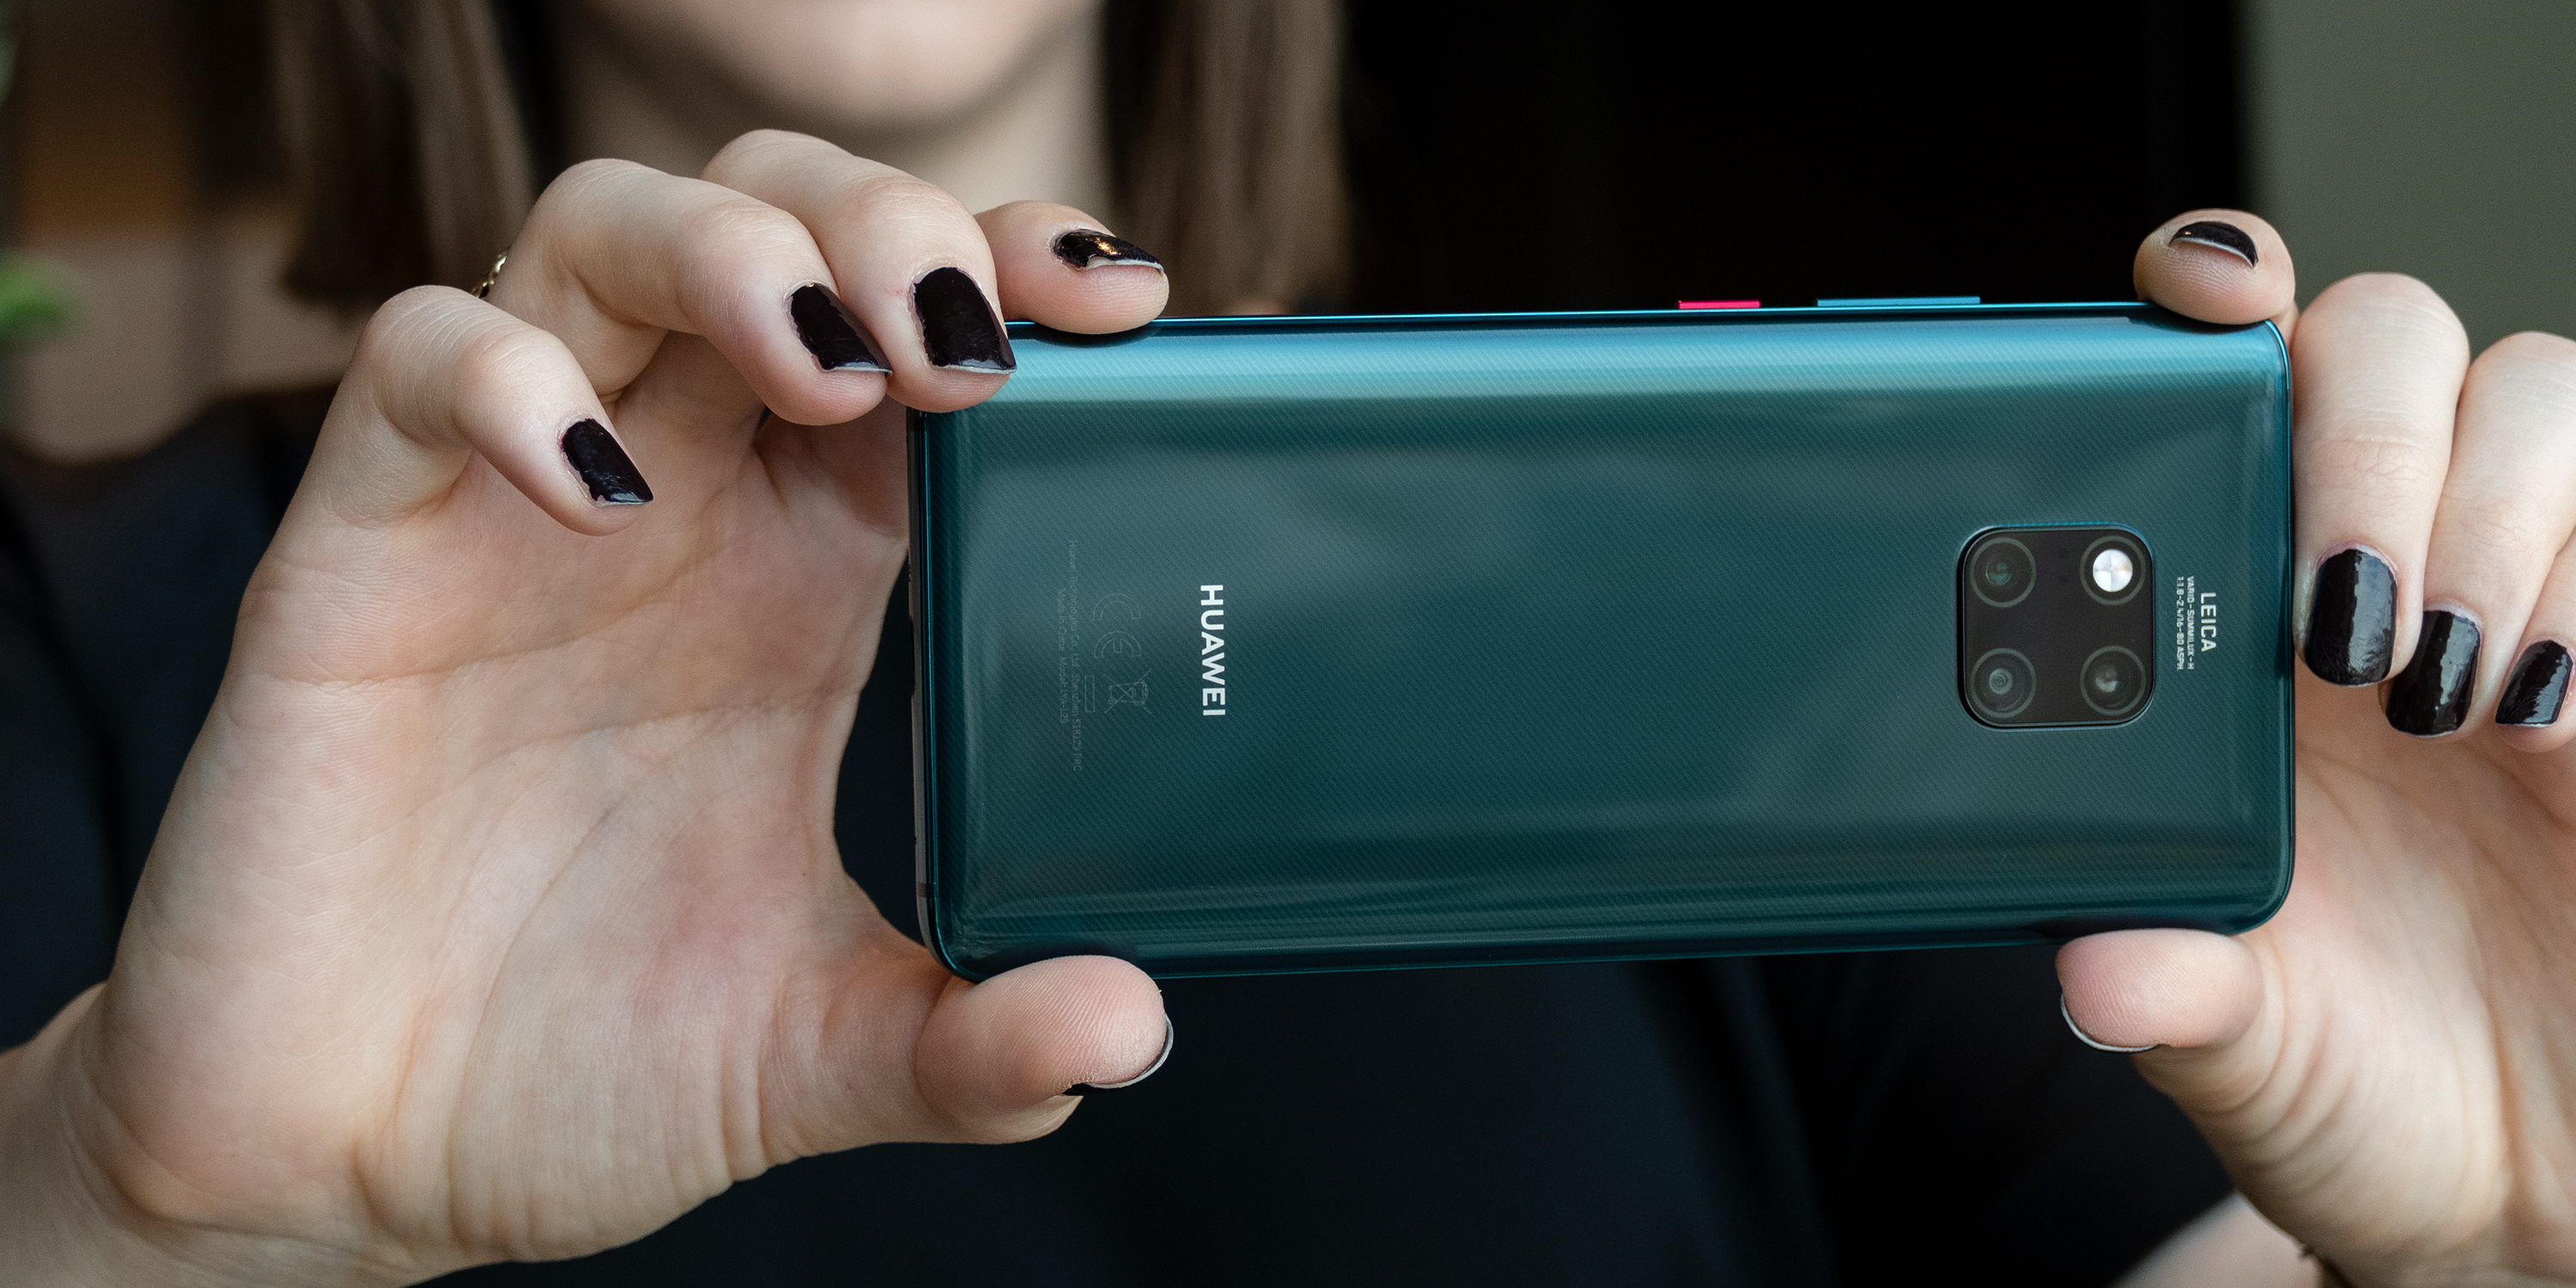 Huawei Mate 20 Pro Review | Digital Trends